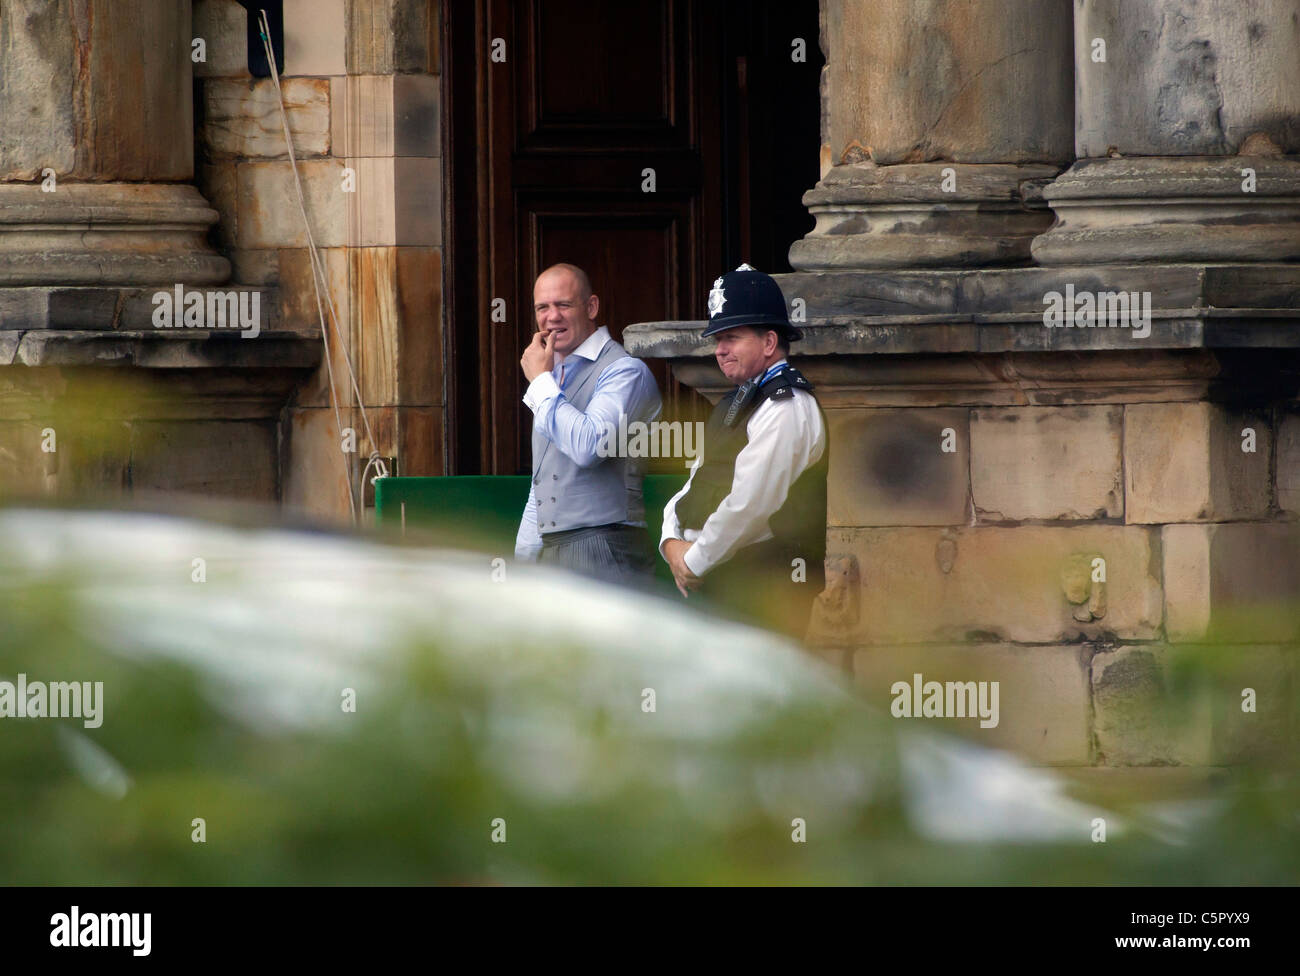 Mike Tyndall arrives back at  the Palace of Holyroodhouse the day after his wedding to Zara Phillips, still wearing his wedding  Stock Photo